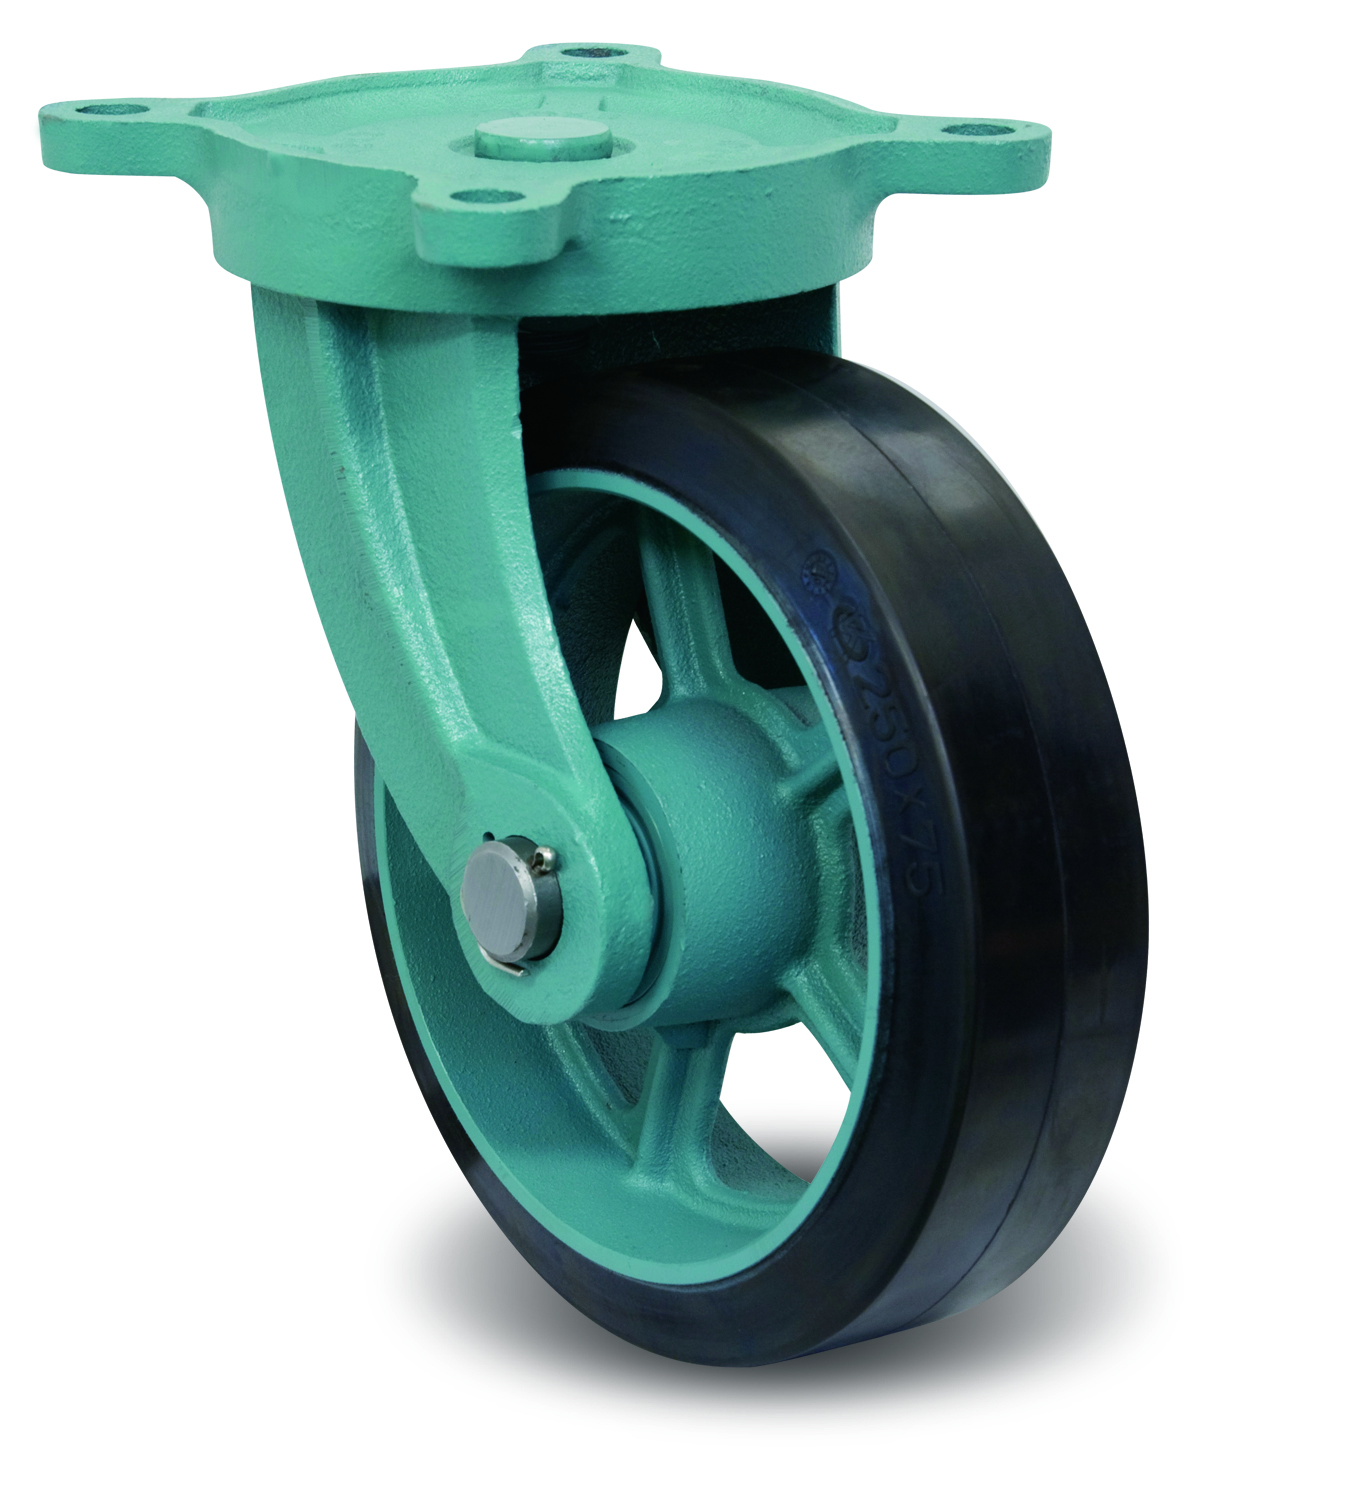 Casters - Rubber with Ductile Steel Swivel Plate, MG-O Series with Bracket, E/MG-O Series. EMG-O250X65